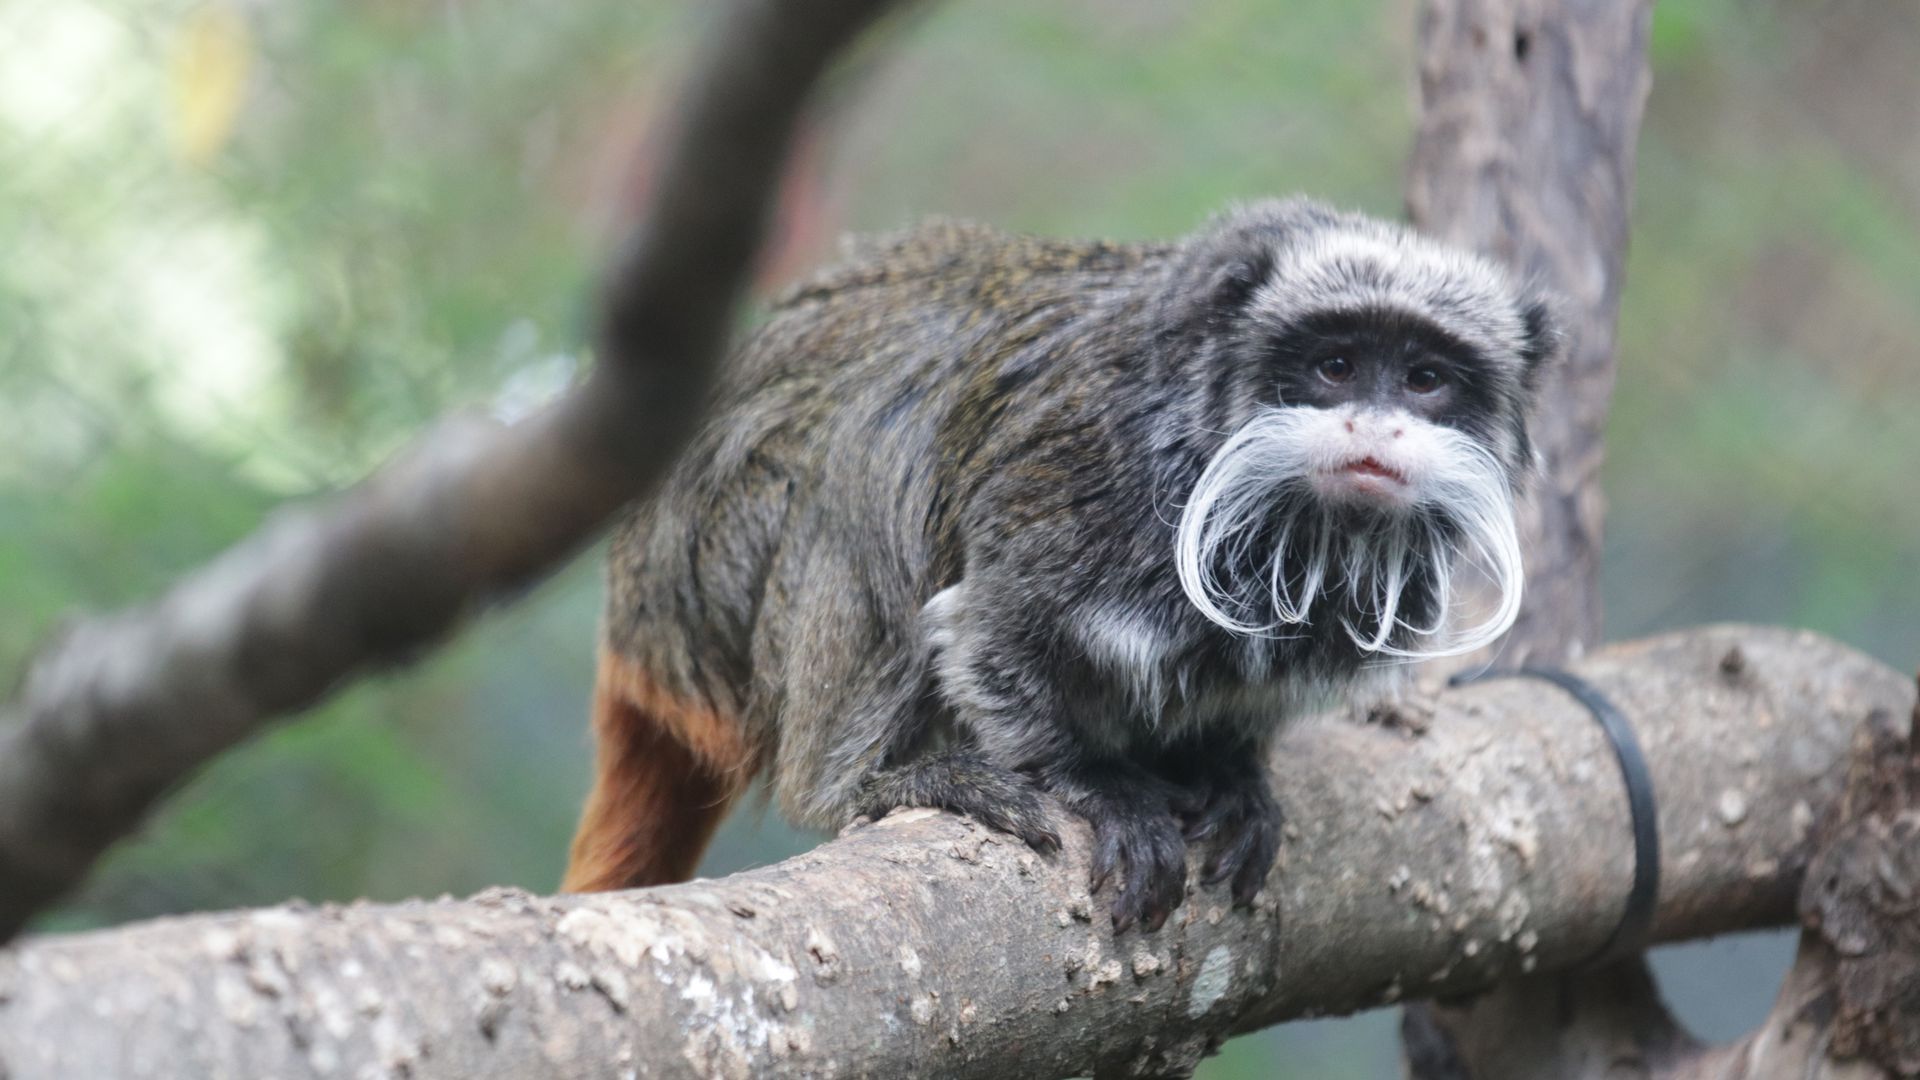 One of the emperor tamarins at the Dallas Zoo. Photo: Courtesy of Dallas Zoo